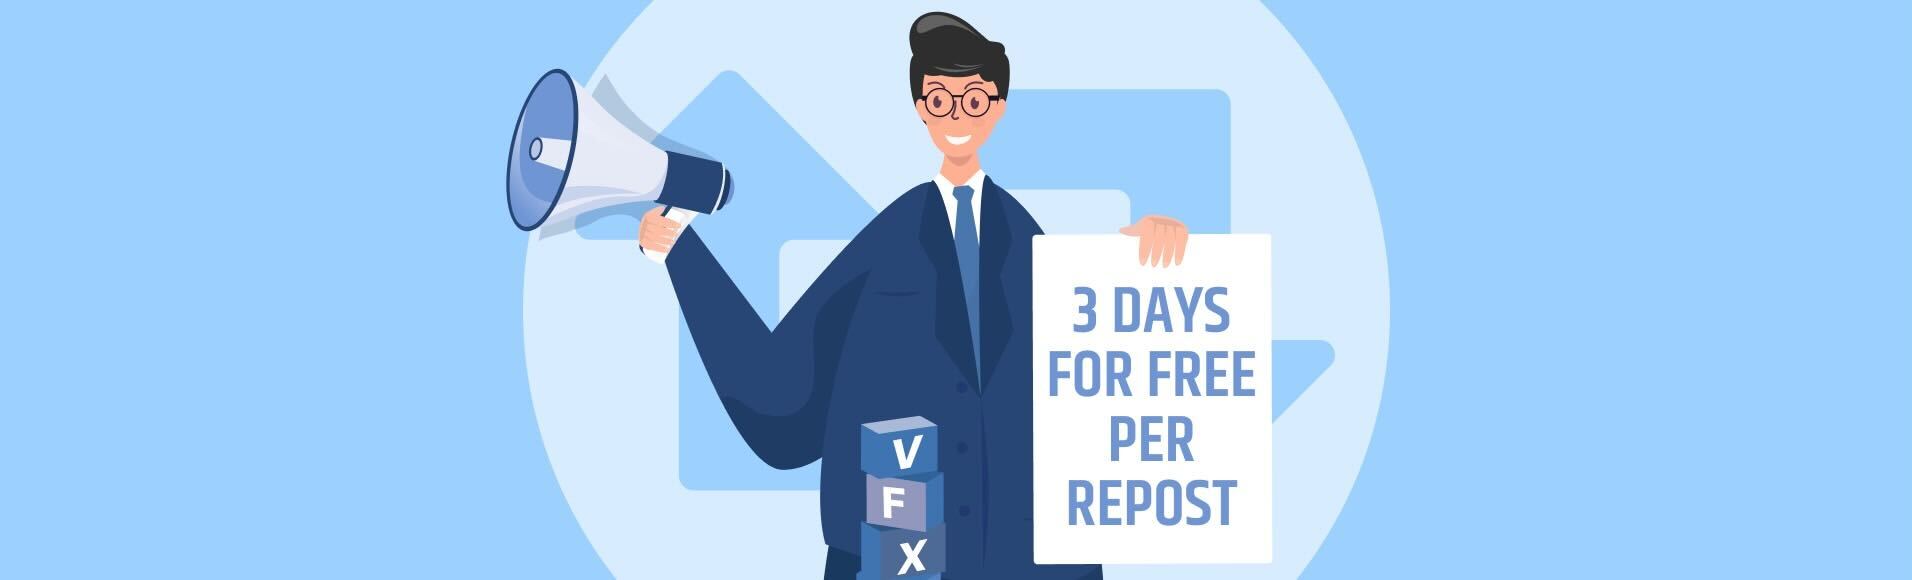 Terms of the promotion “3 days for free on PRO license “Test” per repost”